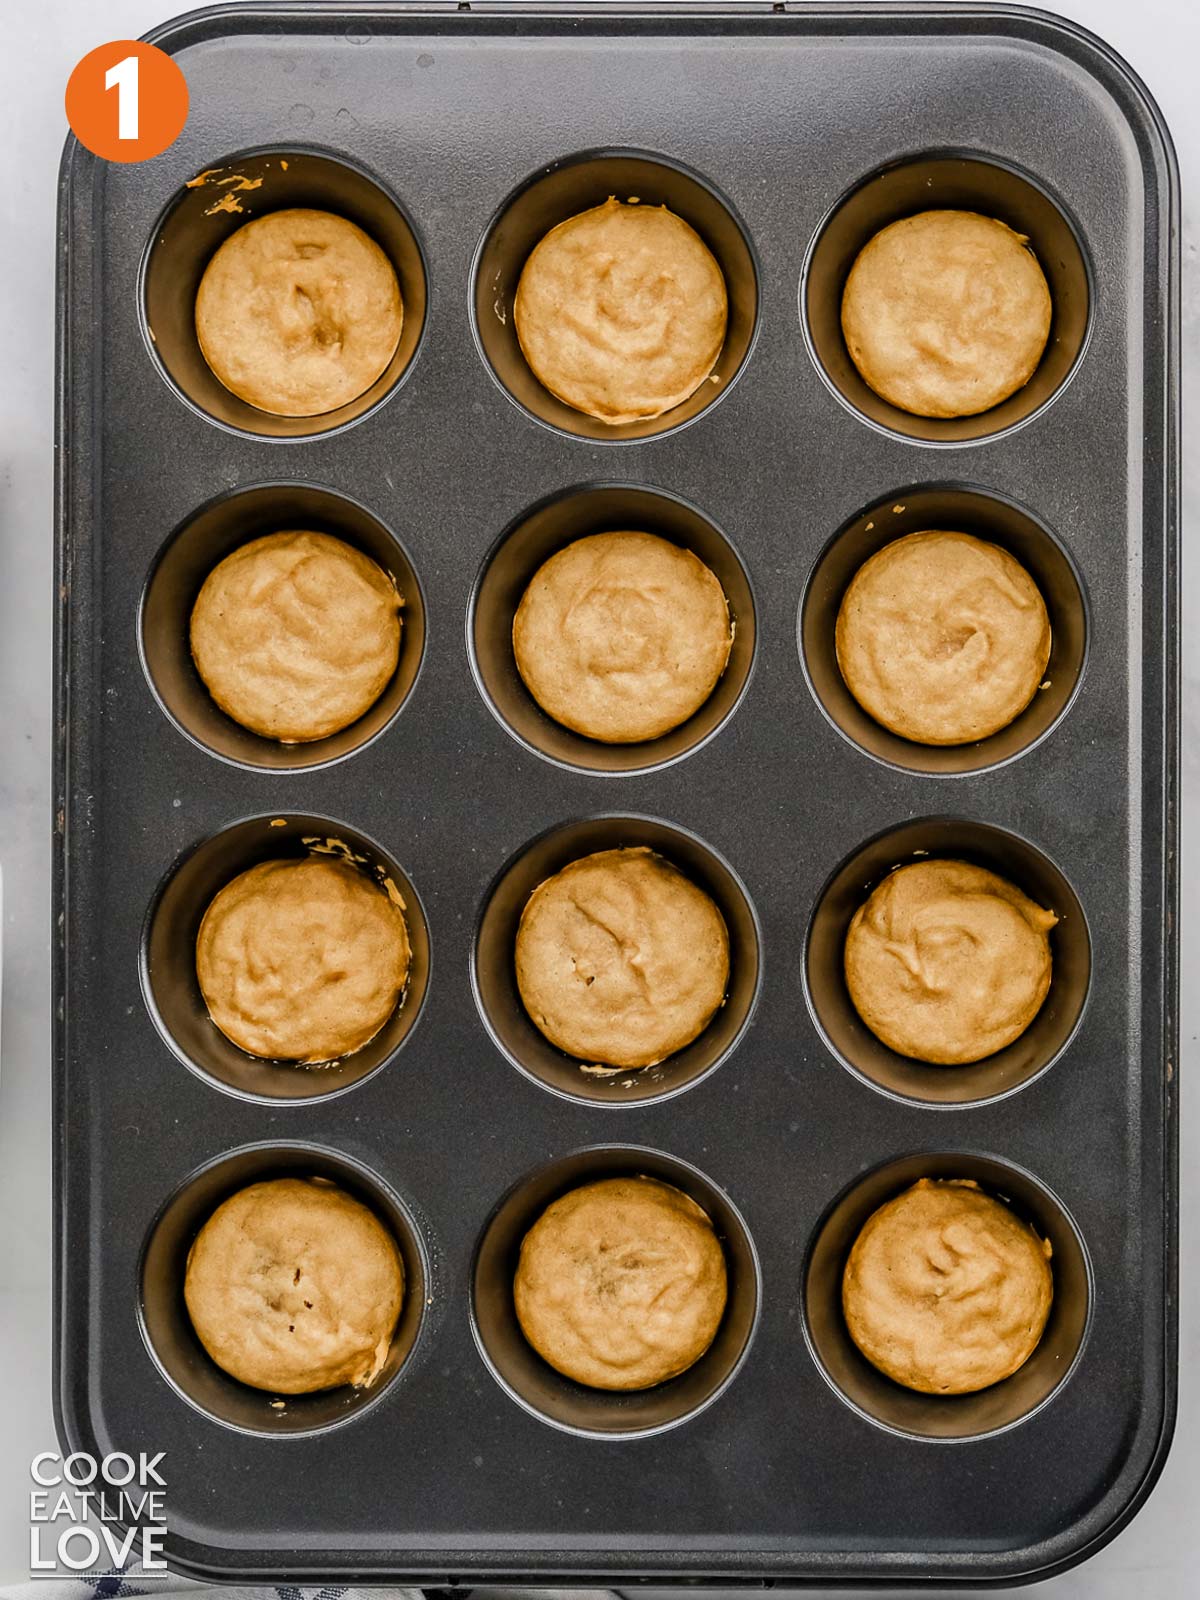 Base of jaffa cakes cooked in a muffin tin.